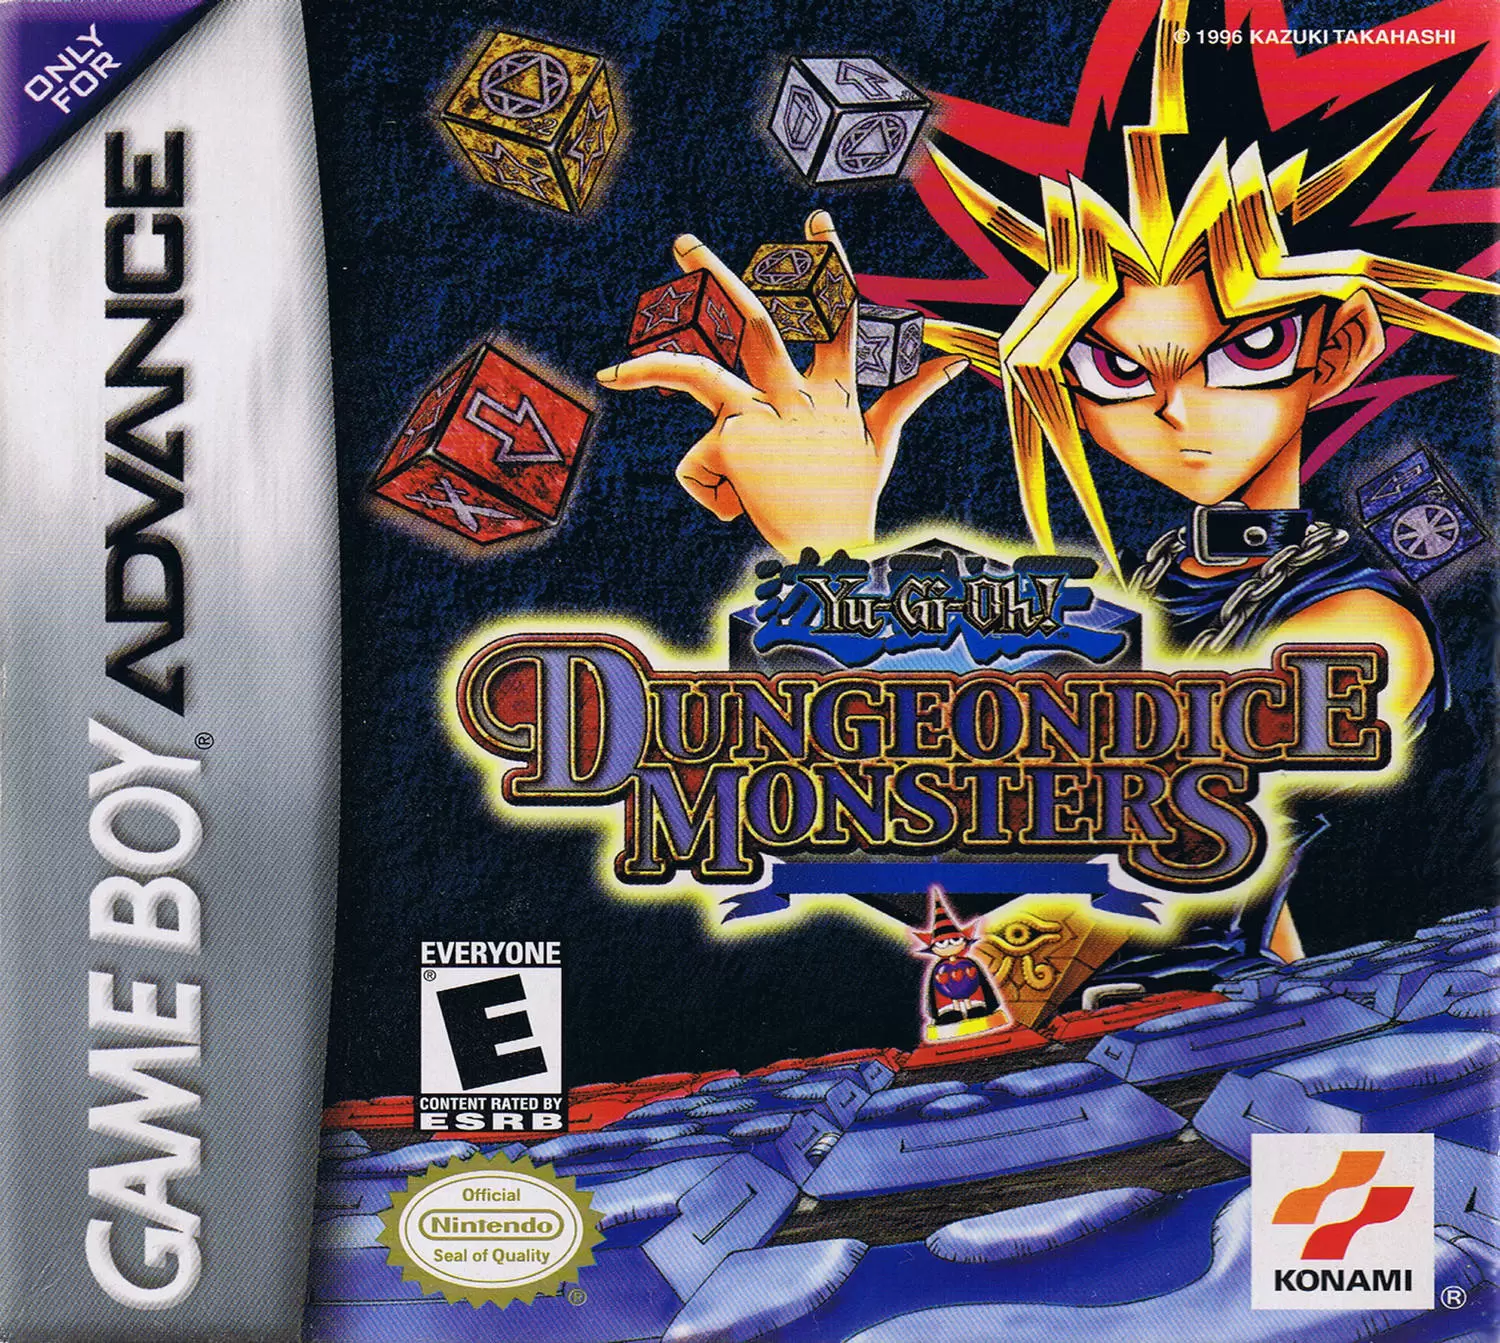 Game Boy Advance Games - Yu-Gi-Oh!: Dungeon Dice Monsters